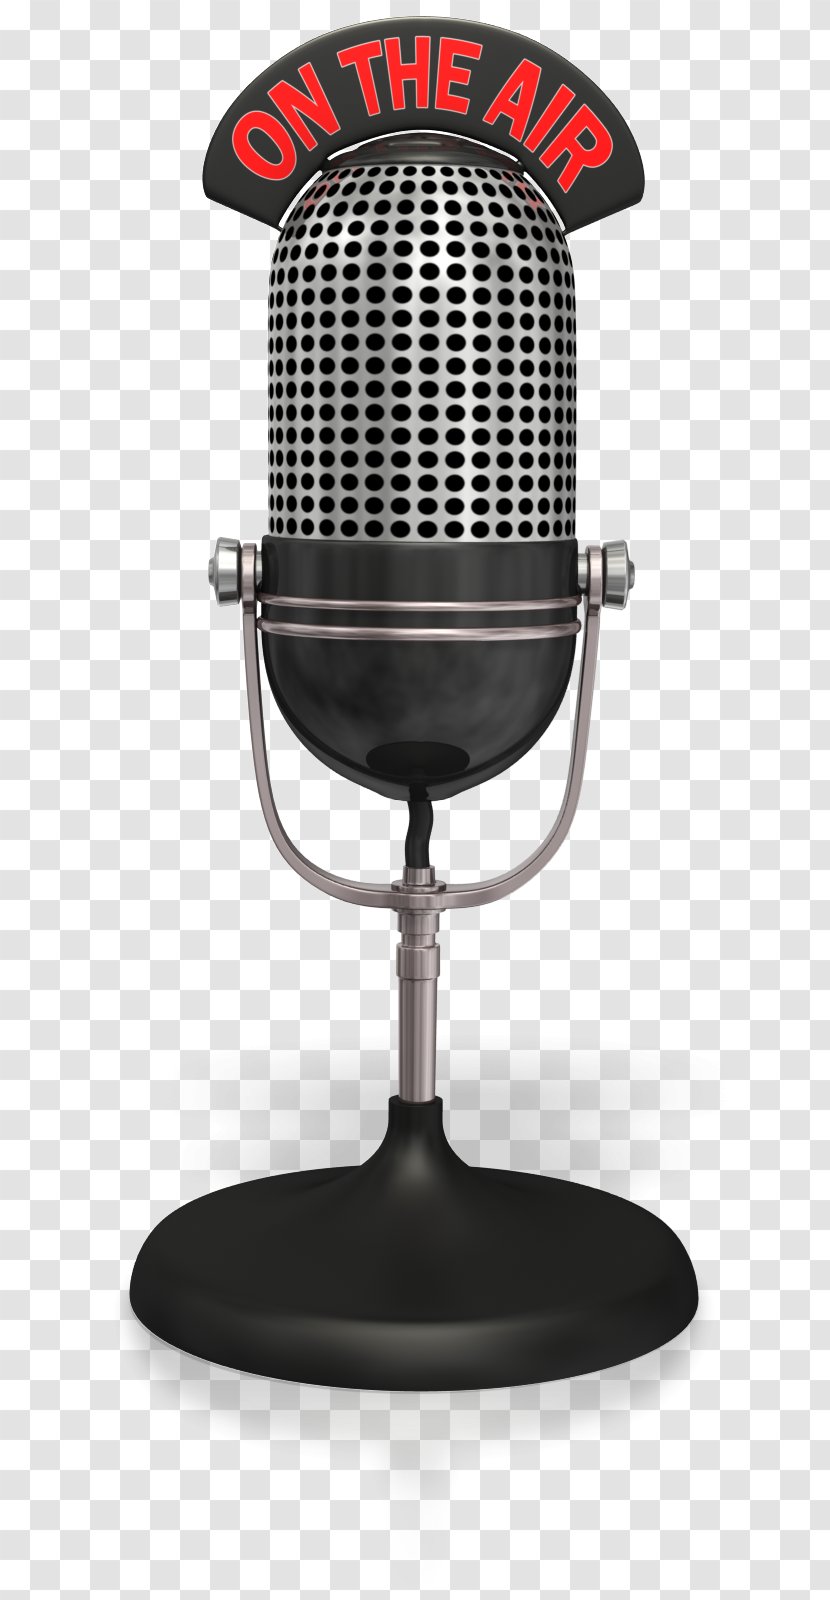 Wireless Microphone Golden Age Of Radio Clip Art - Royaltyfree Transparent PNG